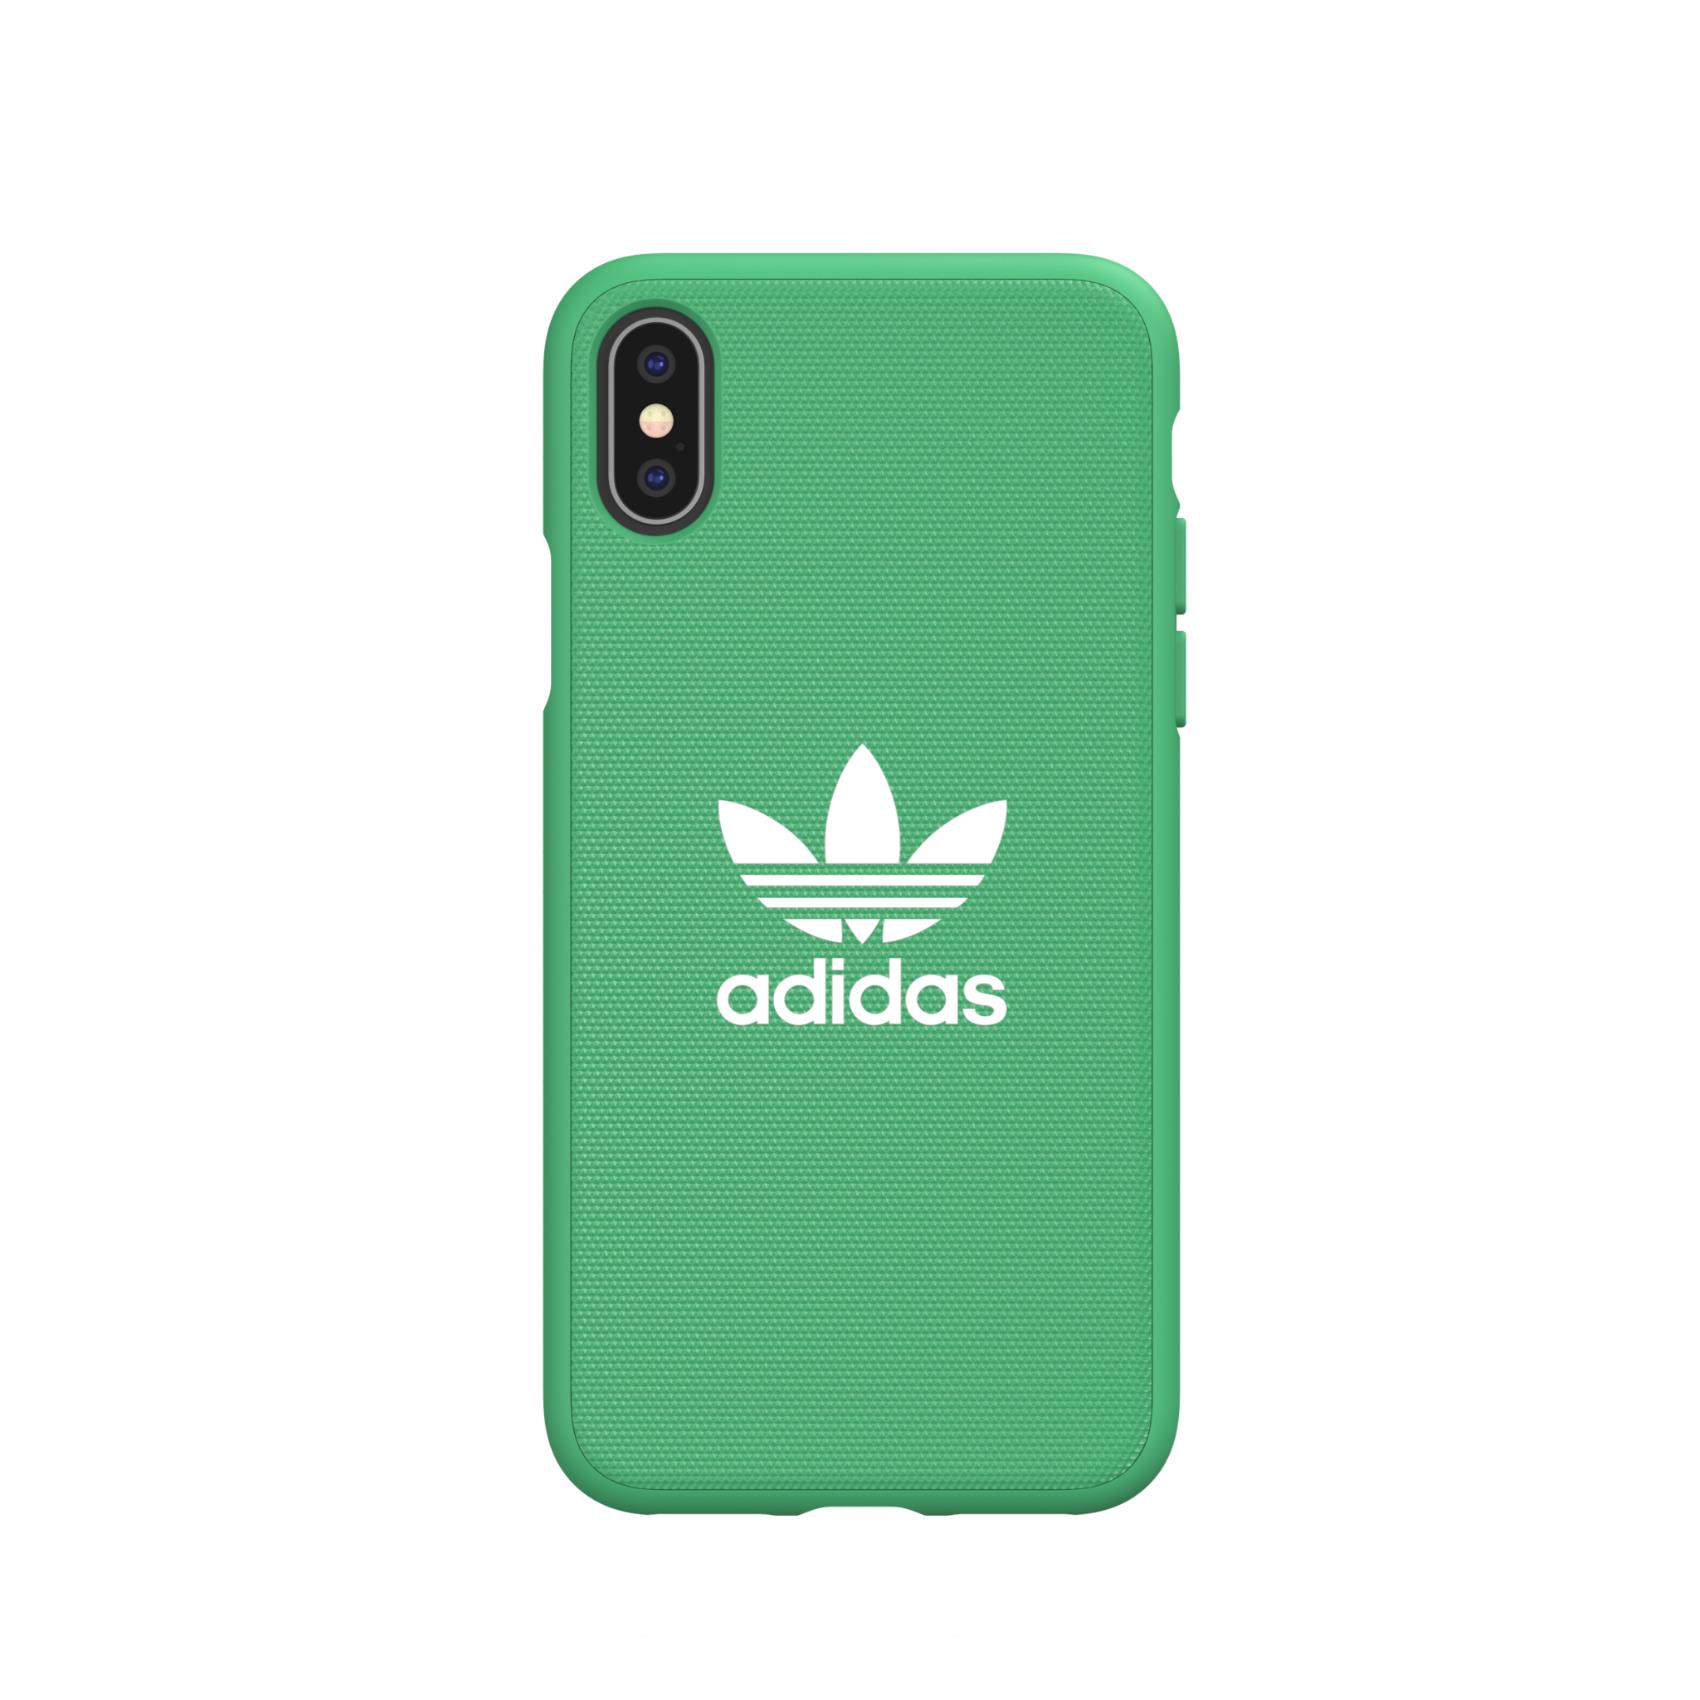 Adicolor Cover Iphone Xs X Green Adidas 33327 8718846065269